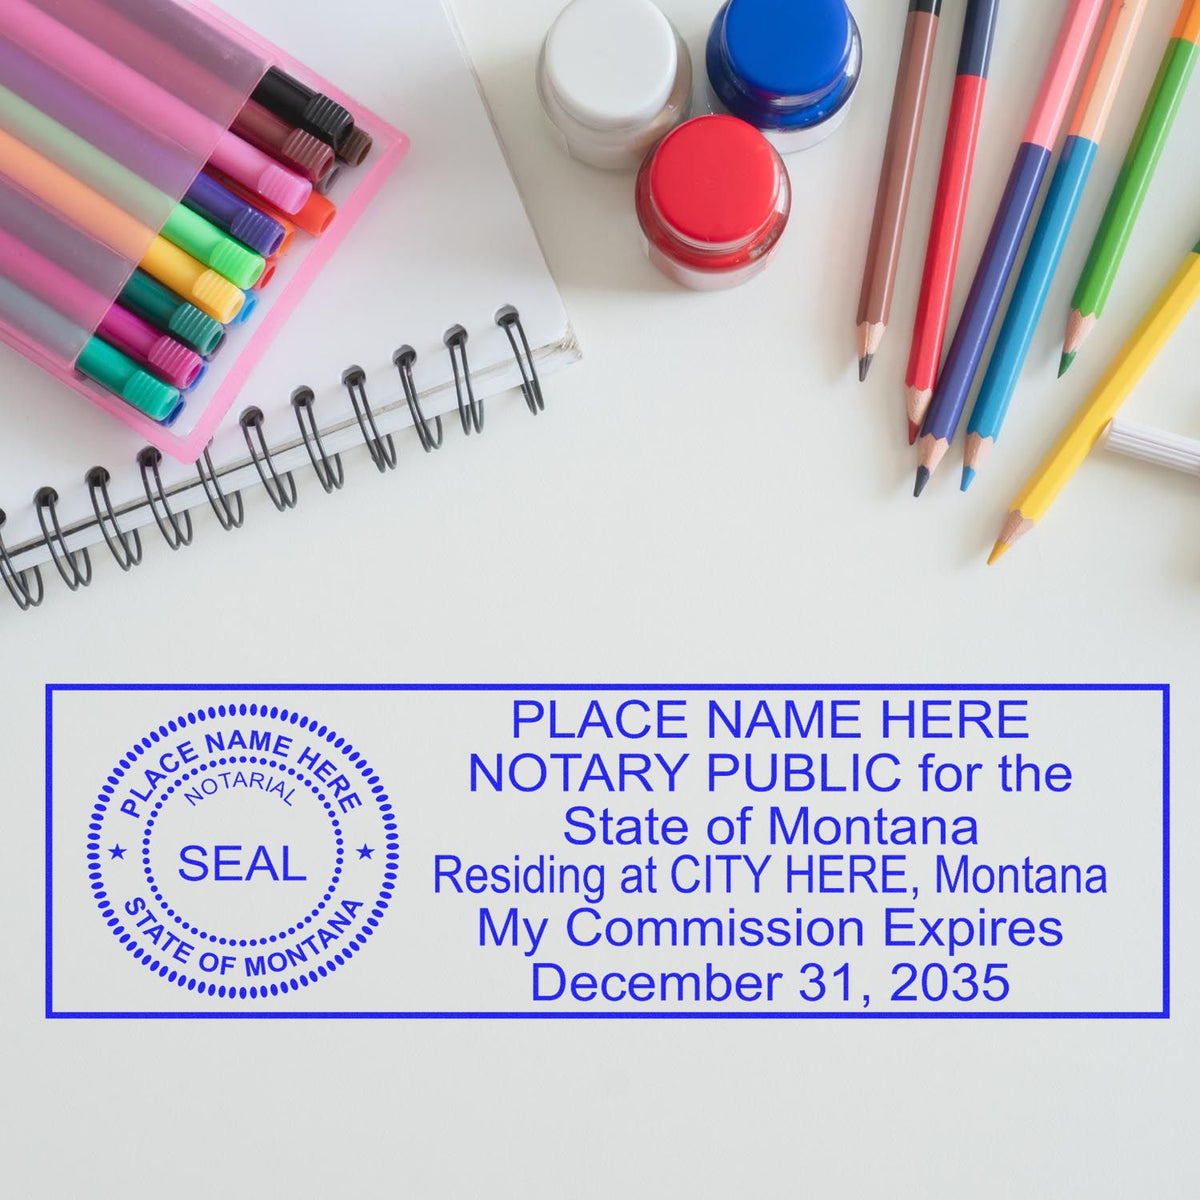 This paper is stamped with a sample imprint of the Wooden Handle Montana State Seal Notary Public Stamp, signifying its quality and reliability.